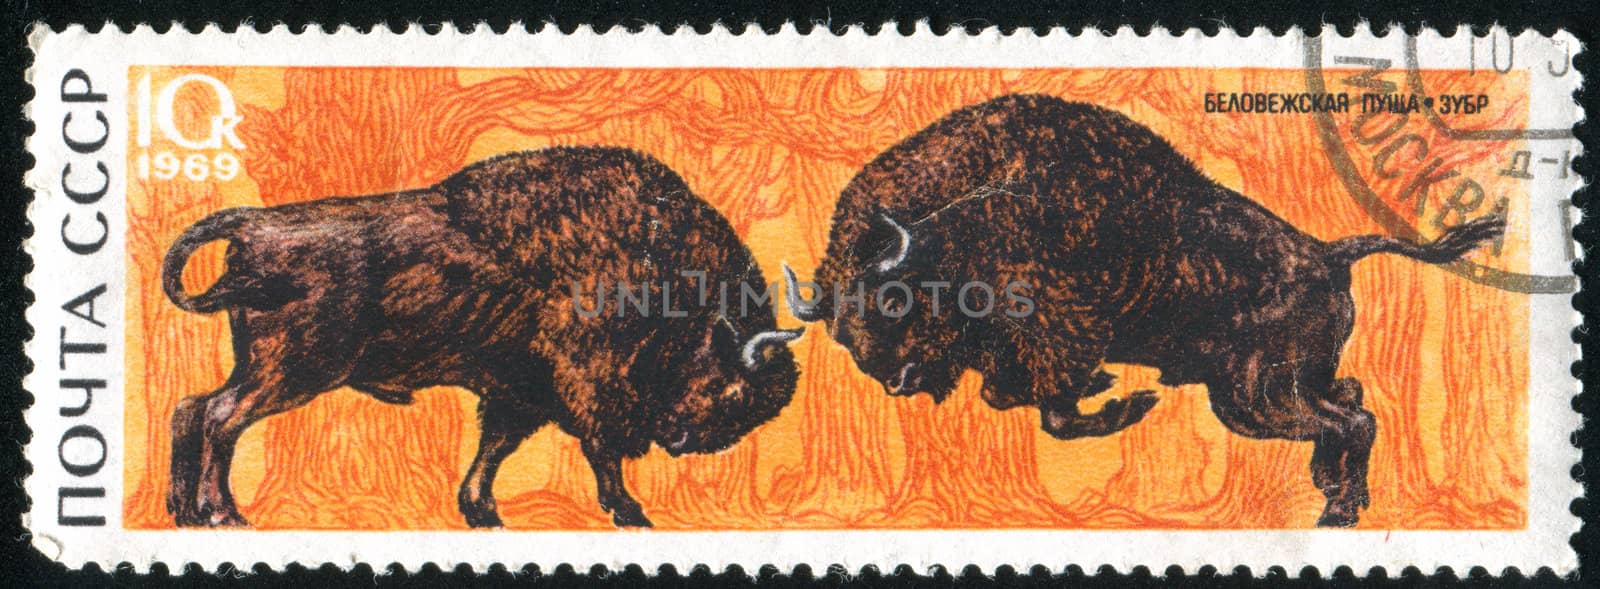 RUSSIA - CIRCA 1969: stamp printed by Russia, shows Fighting bison, circa 1969.